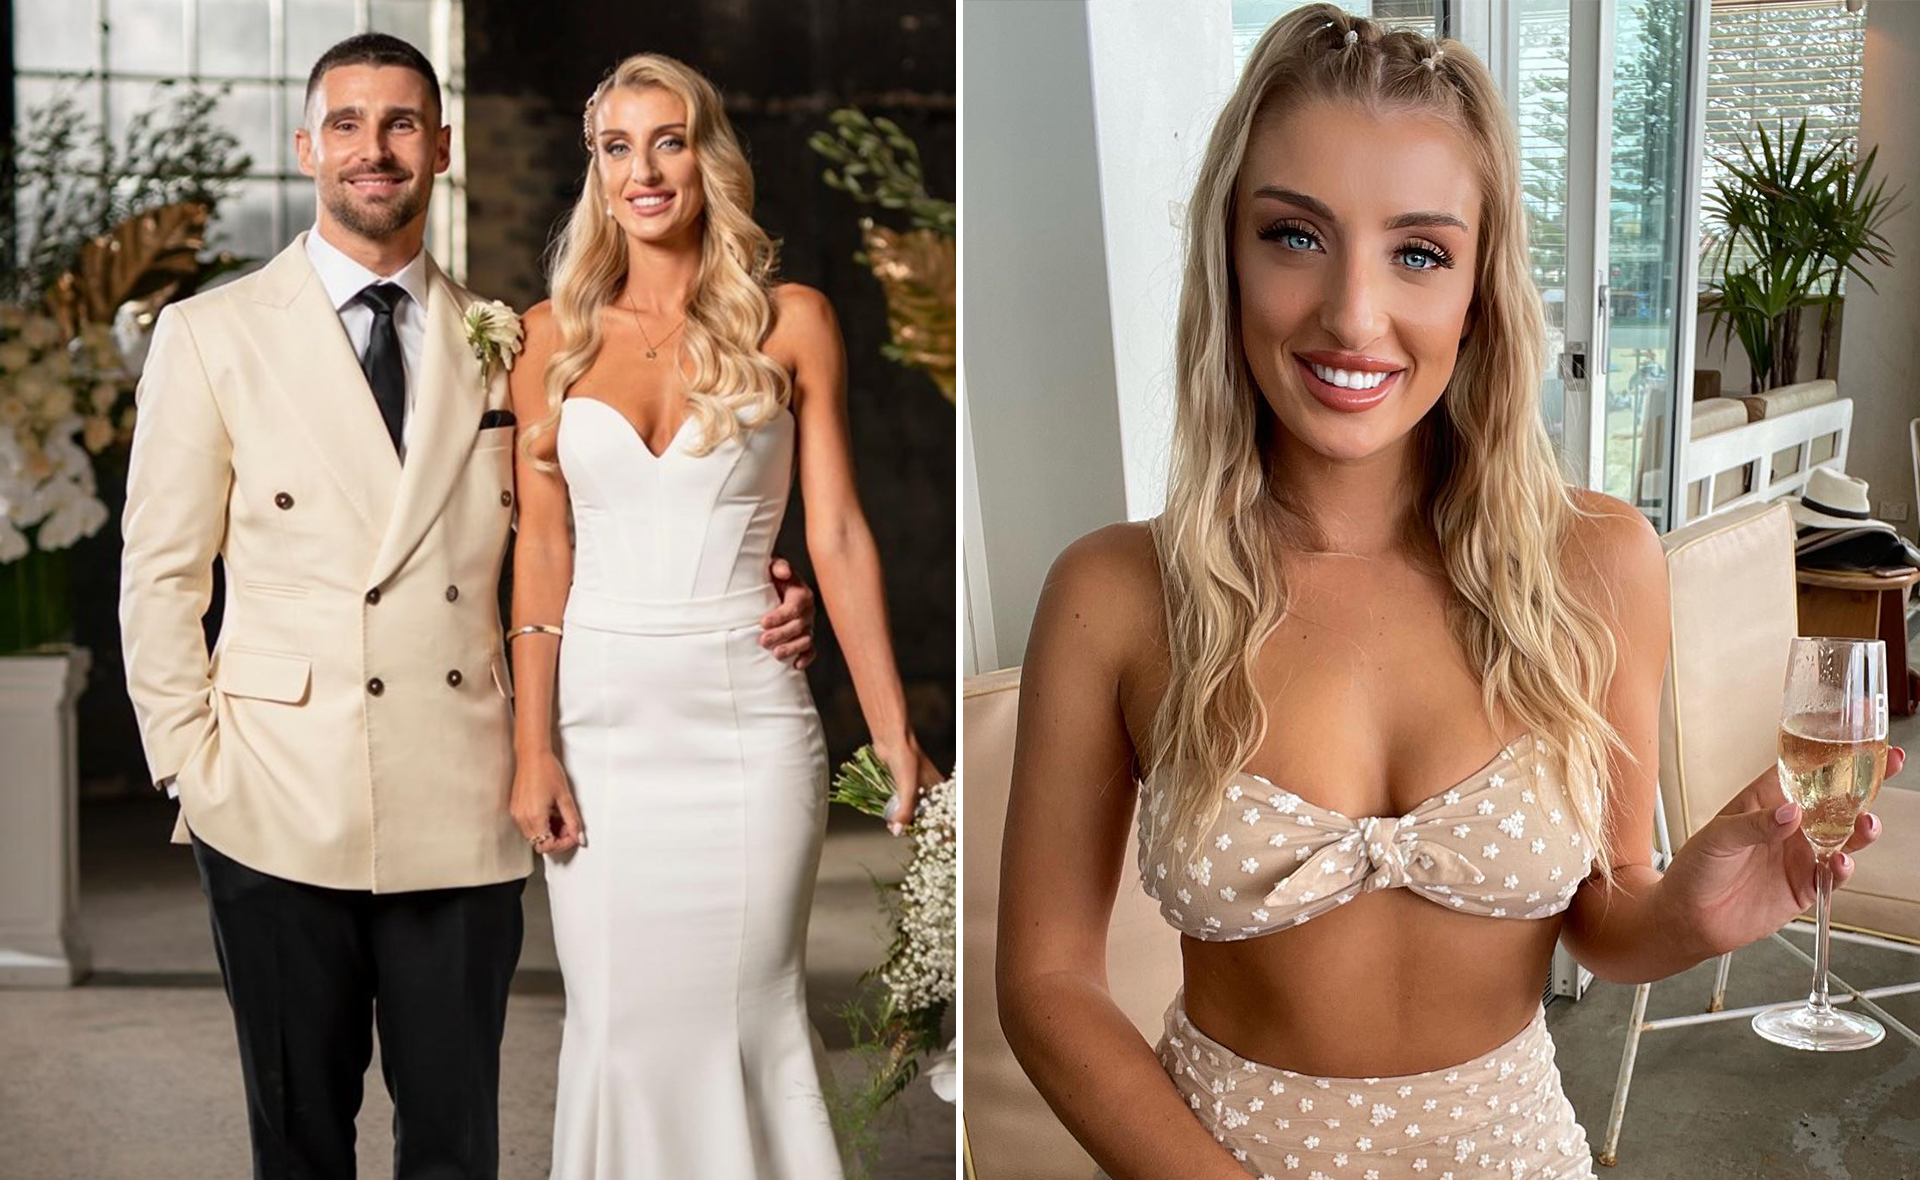 EXCLUSIVE: MAFS star Tamara Djordjevic weighs in on her “villain edit” and reveals “bullying” among the cast